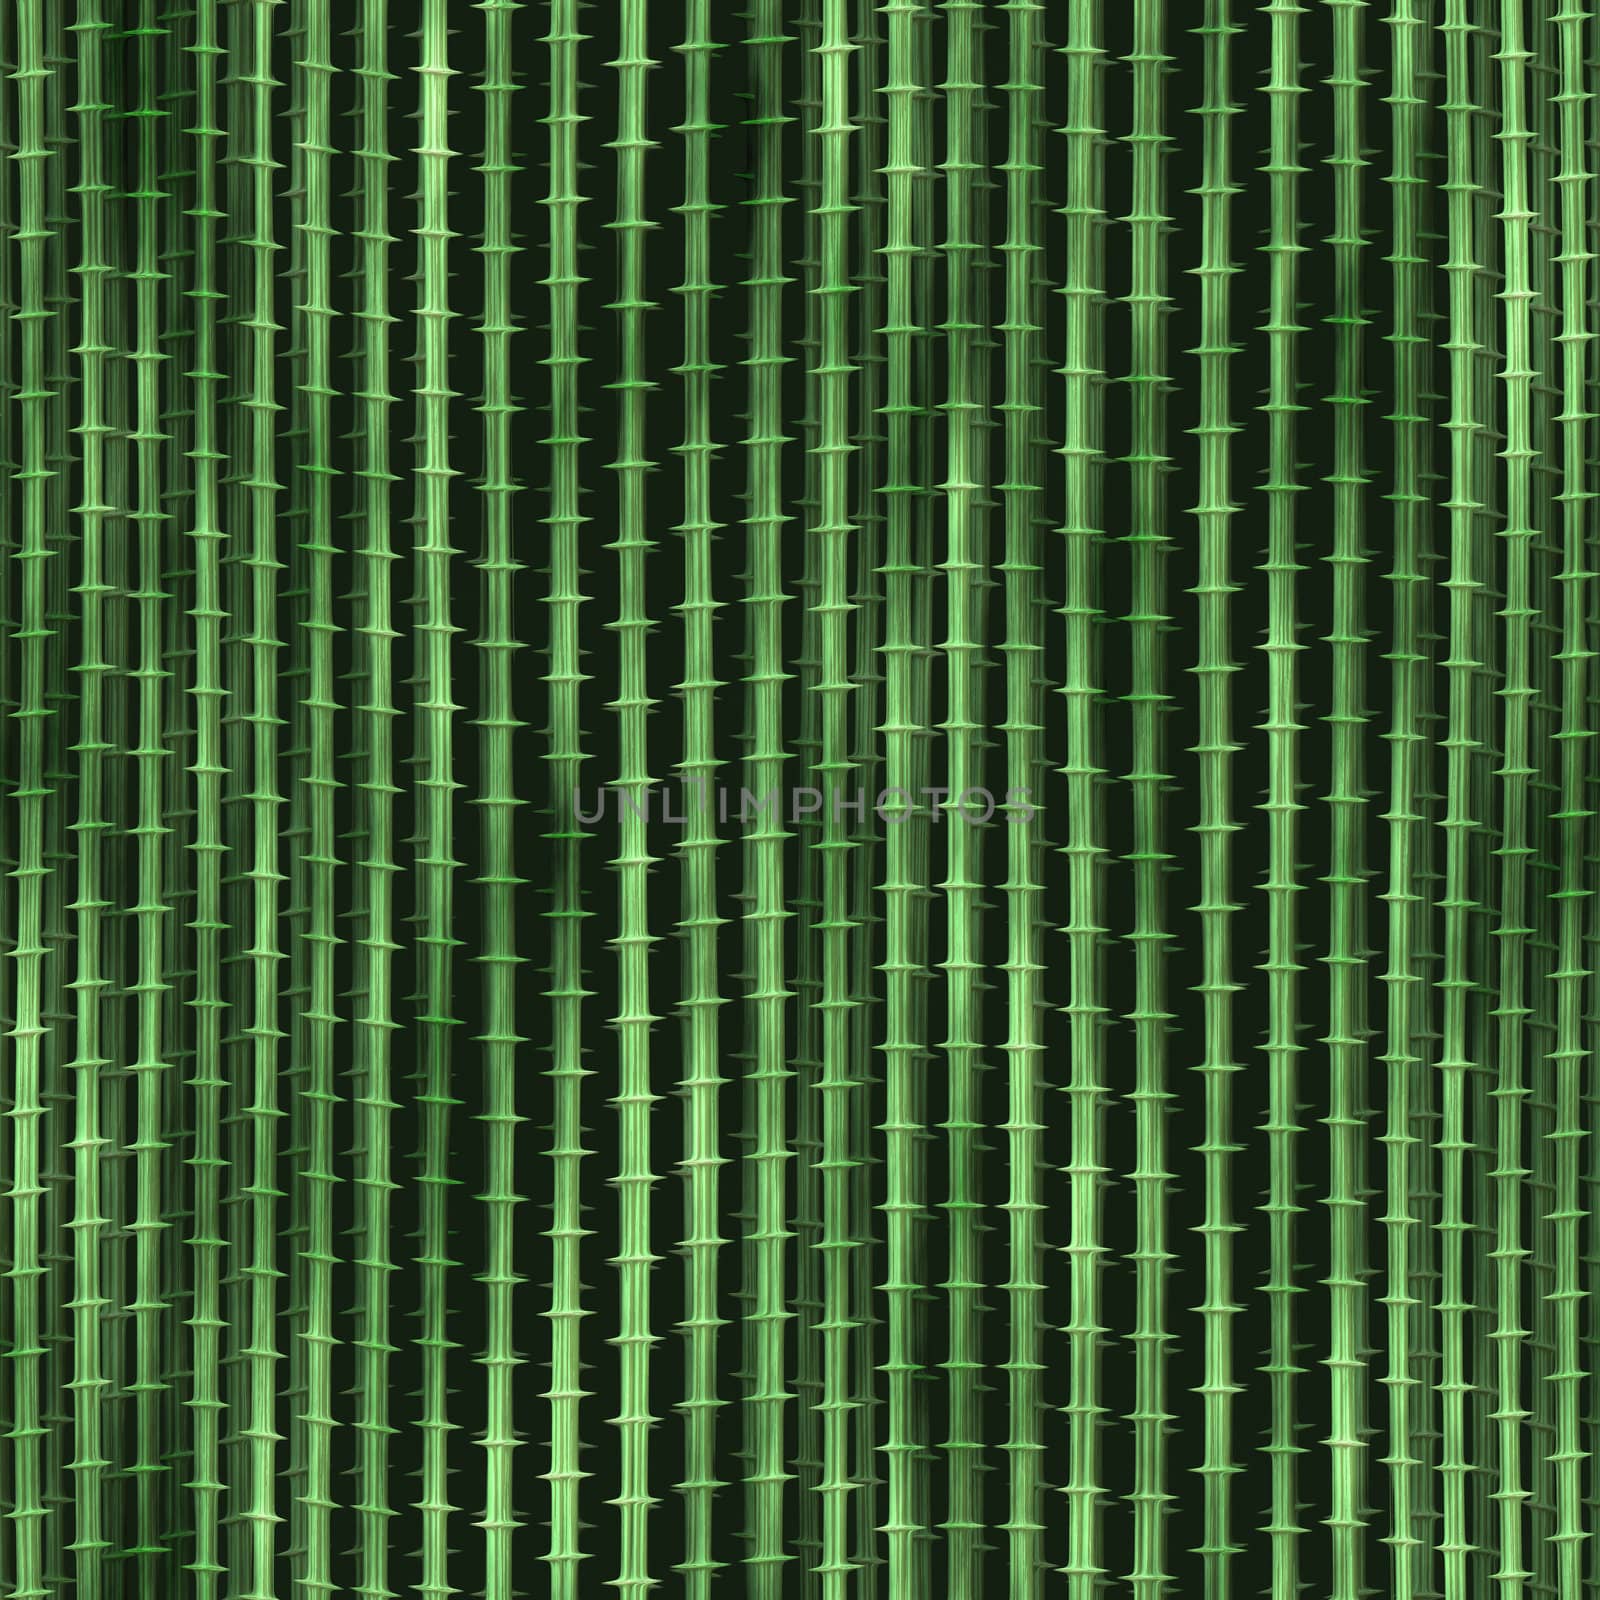 green, smooth bamboo background with small stalks, tiles seamlessly